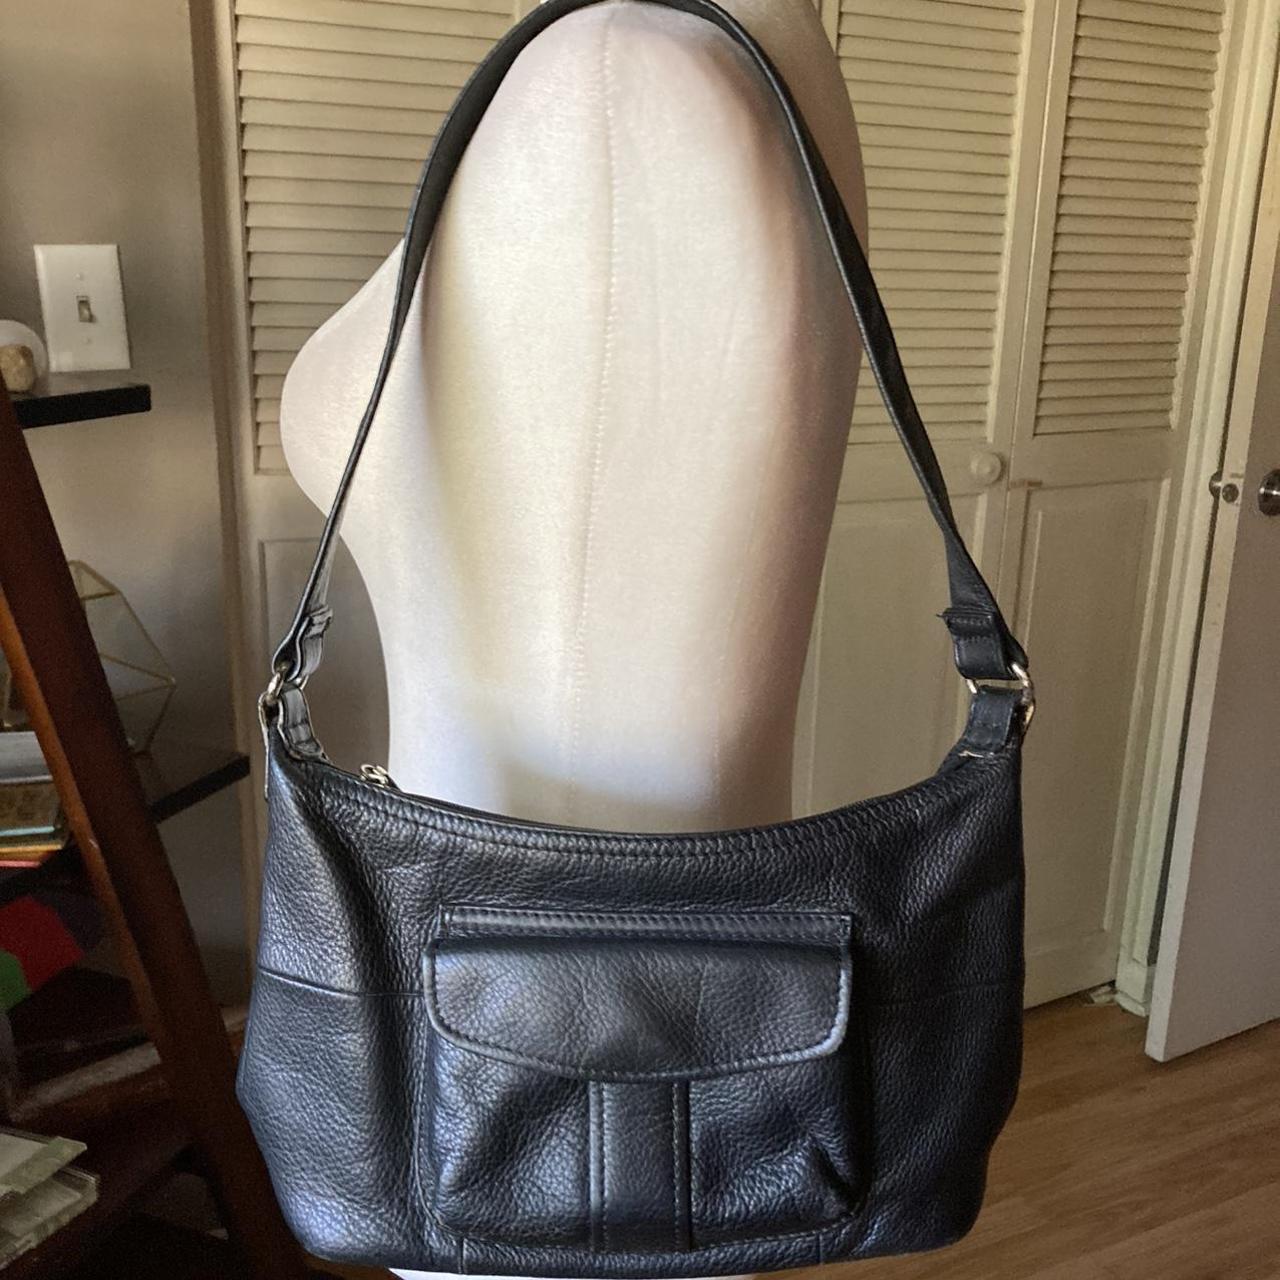 What have been your experiences with Fossil bags? : r/handbags